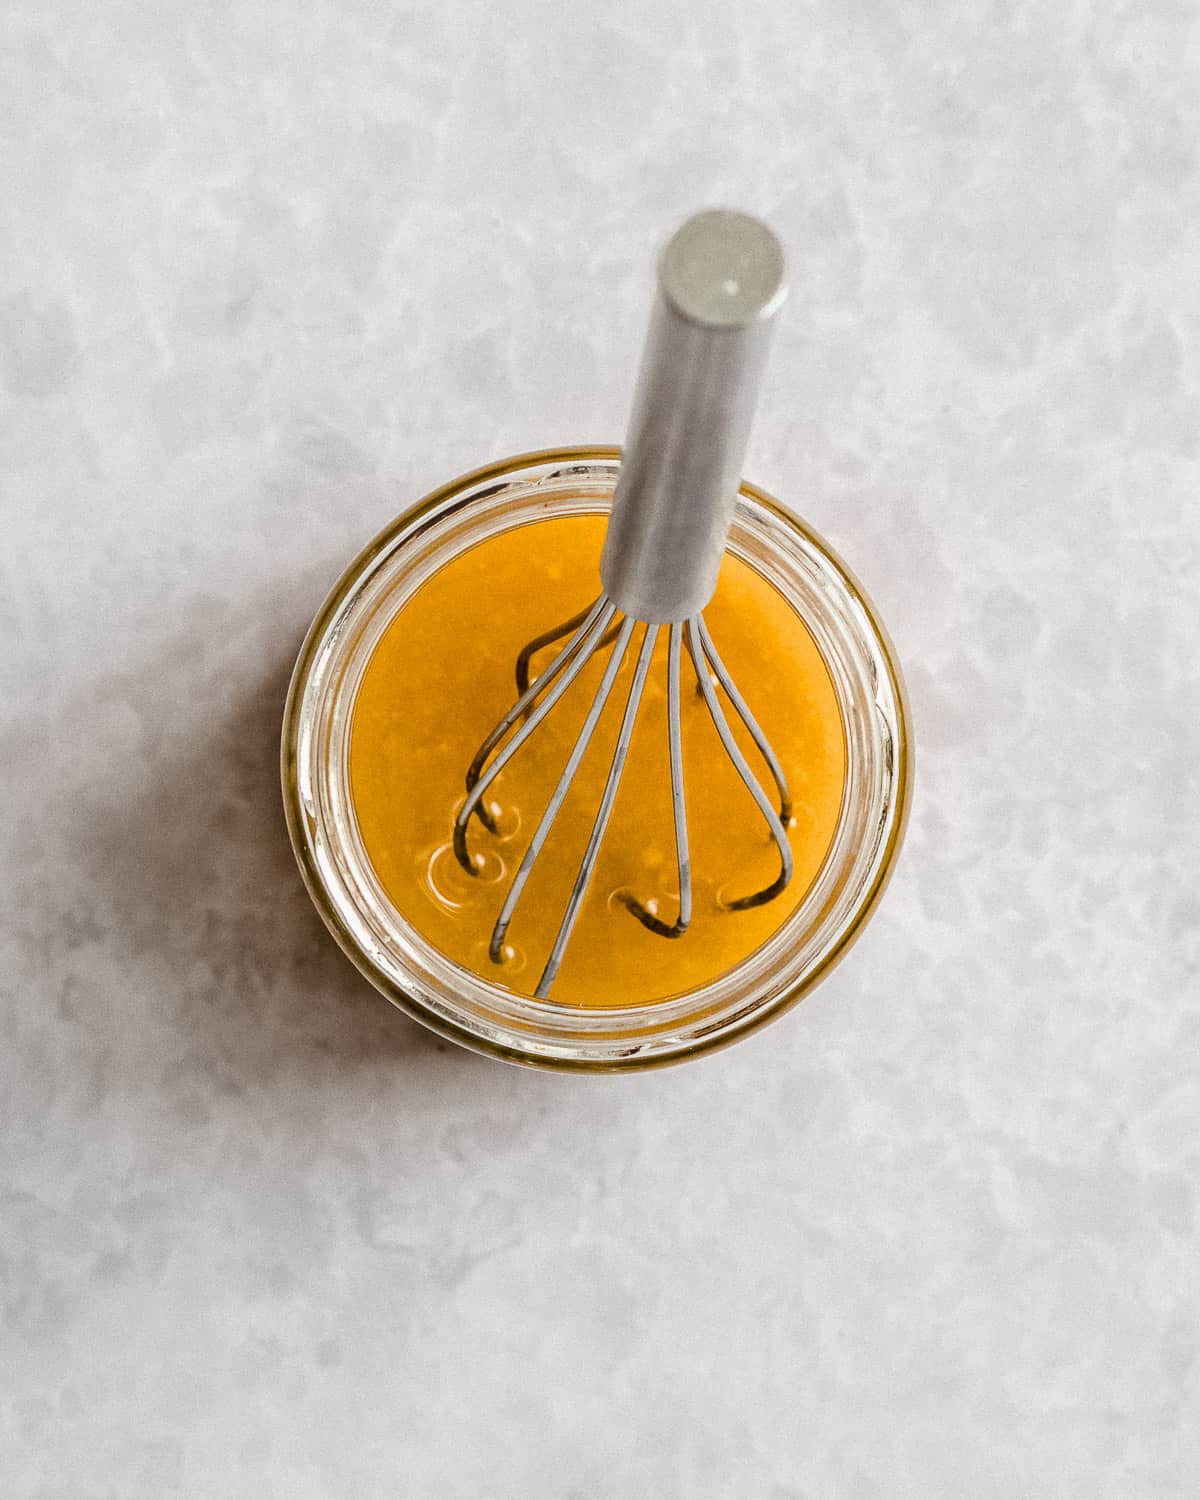 all of the dressing ingredients whisked together with a whisk in a small jar.